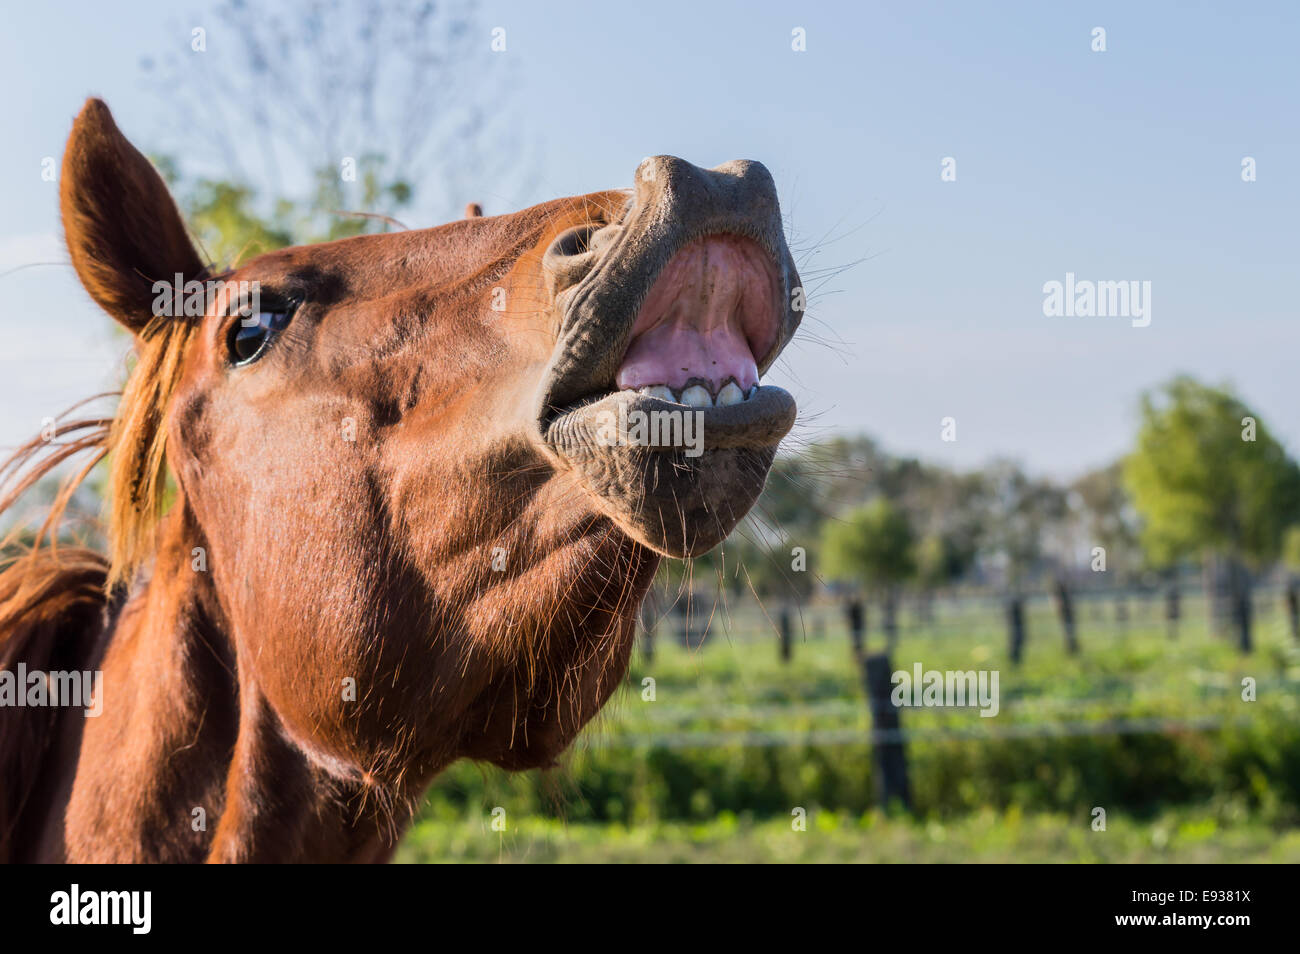 Funny horse portrait, which seems to laugh Stock Photo